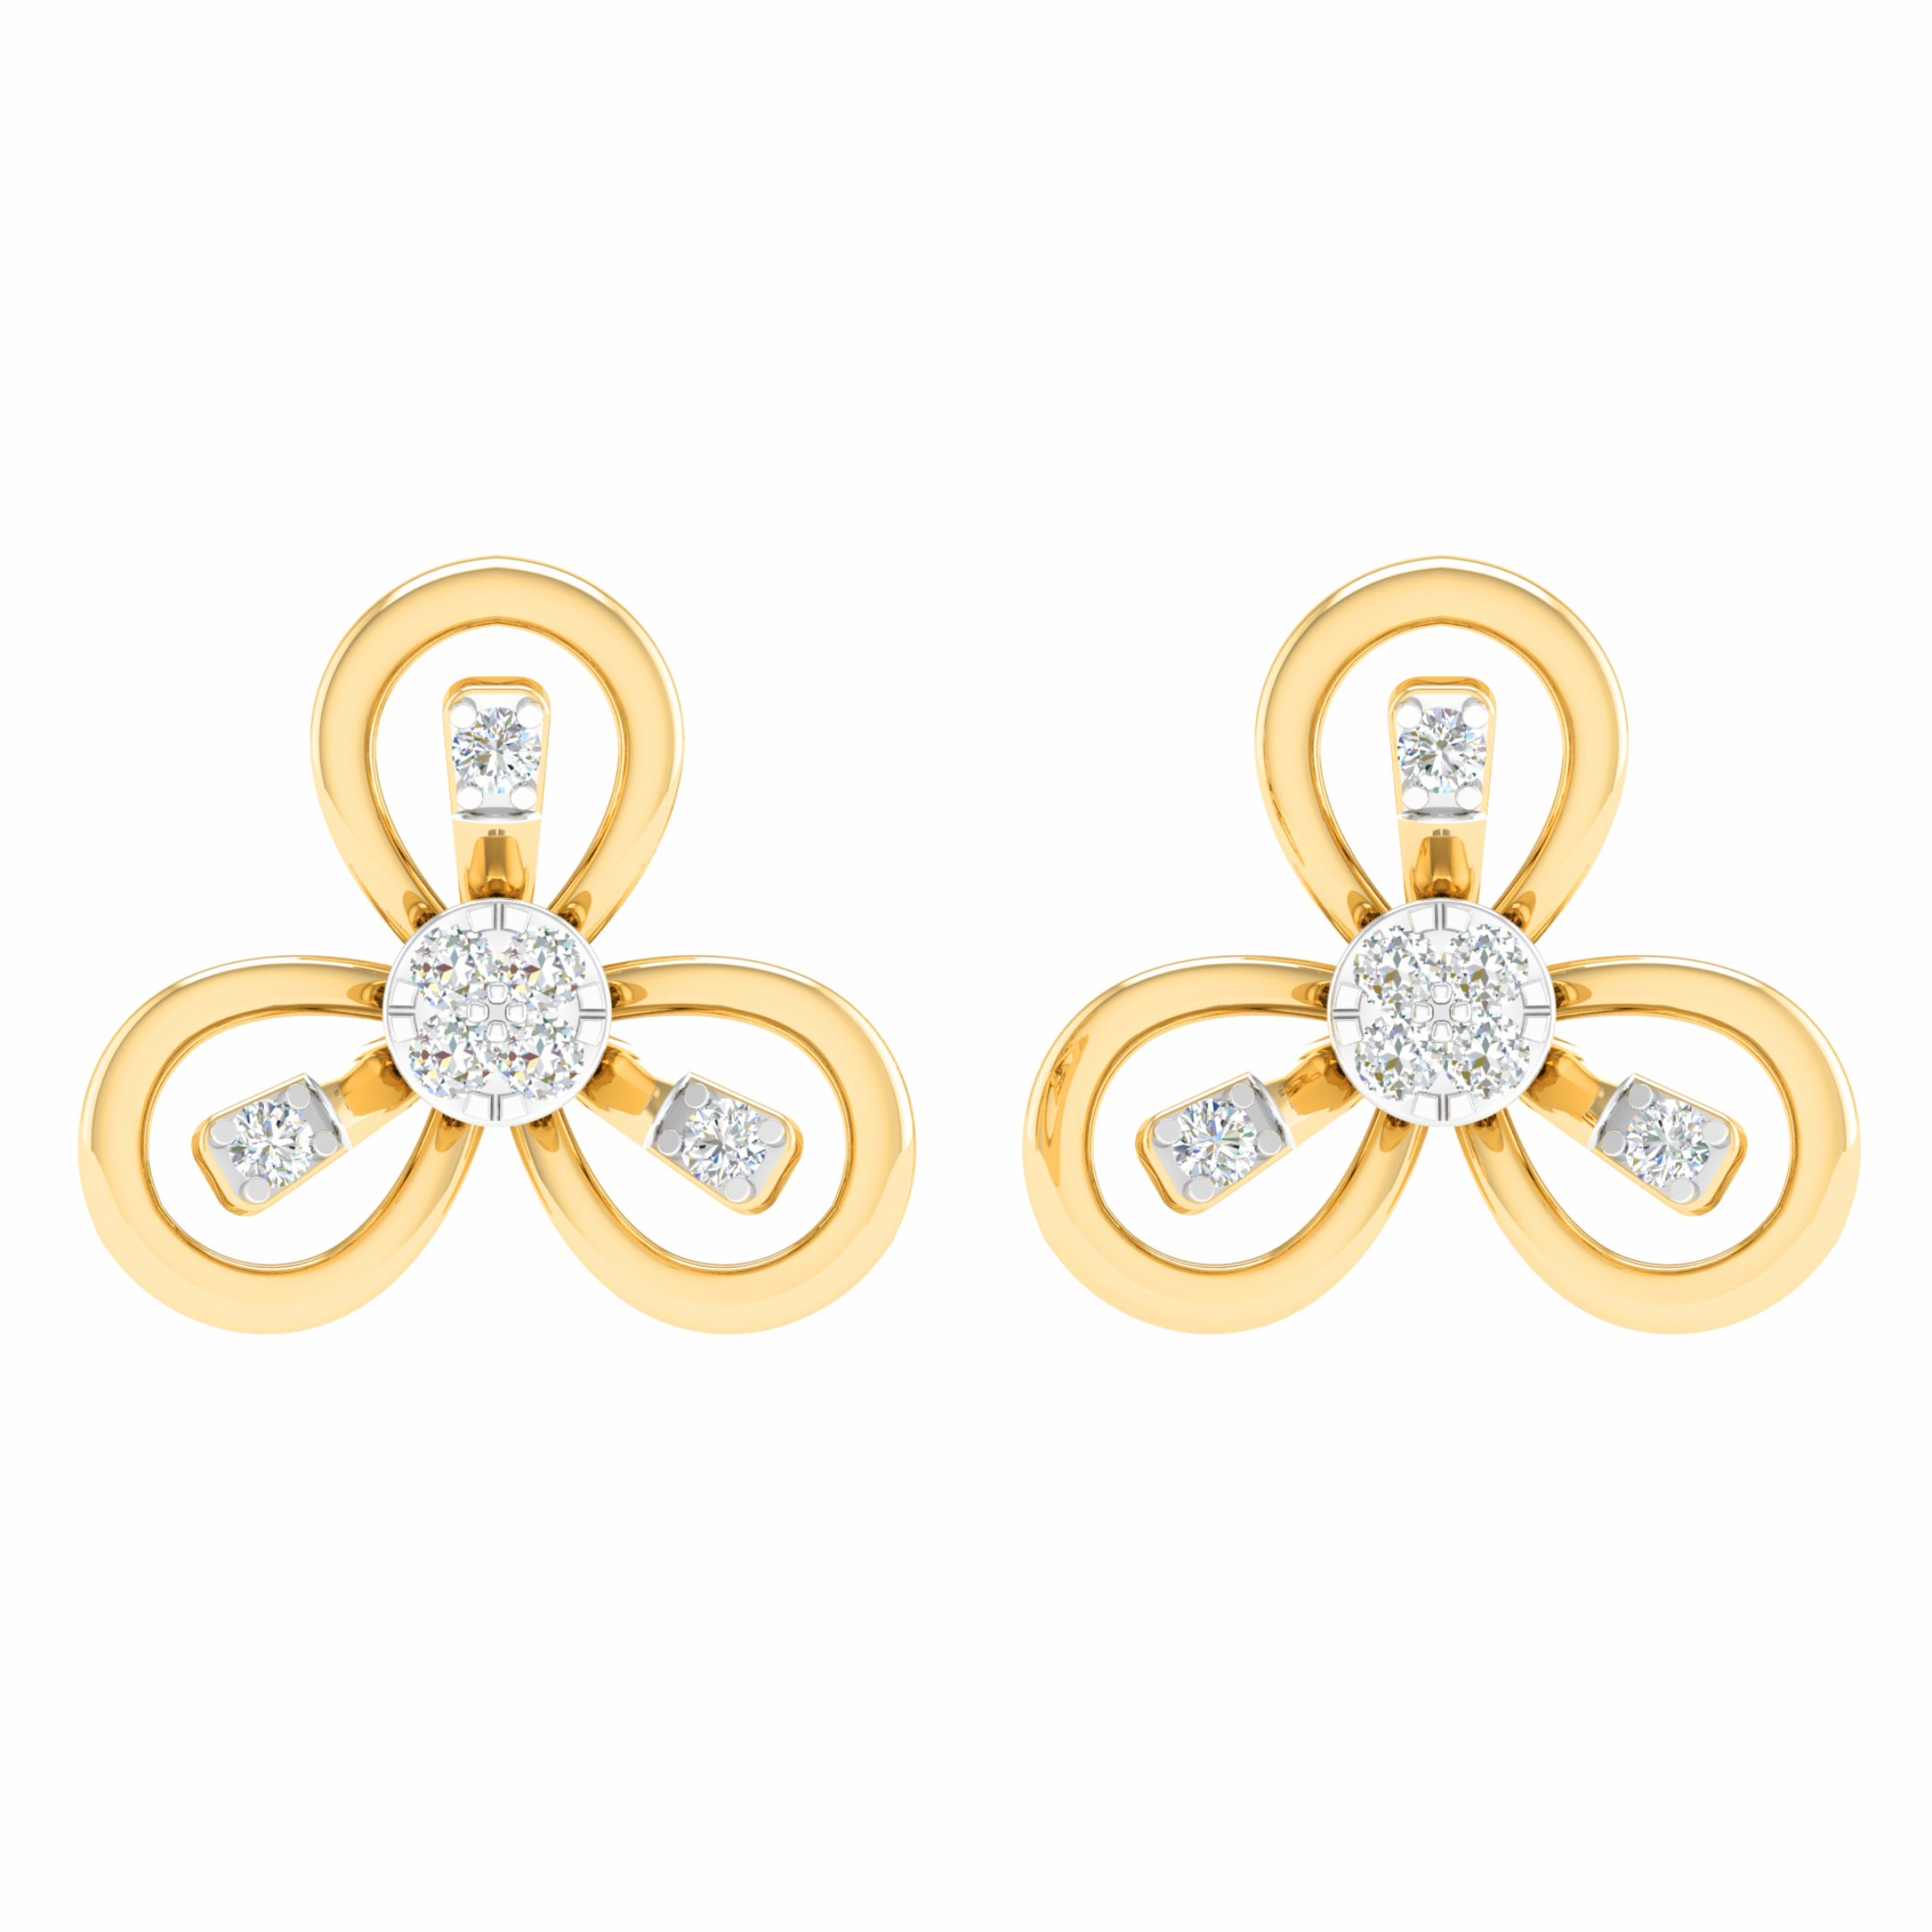 18KT ROSE GOLD FLAX REAL DIAMOND EARRINGS